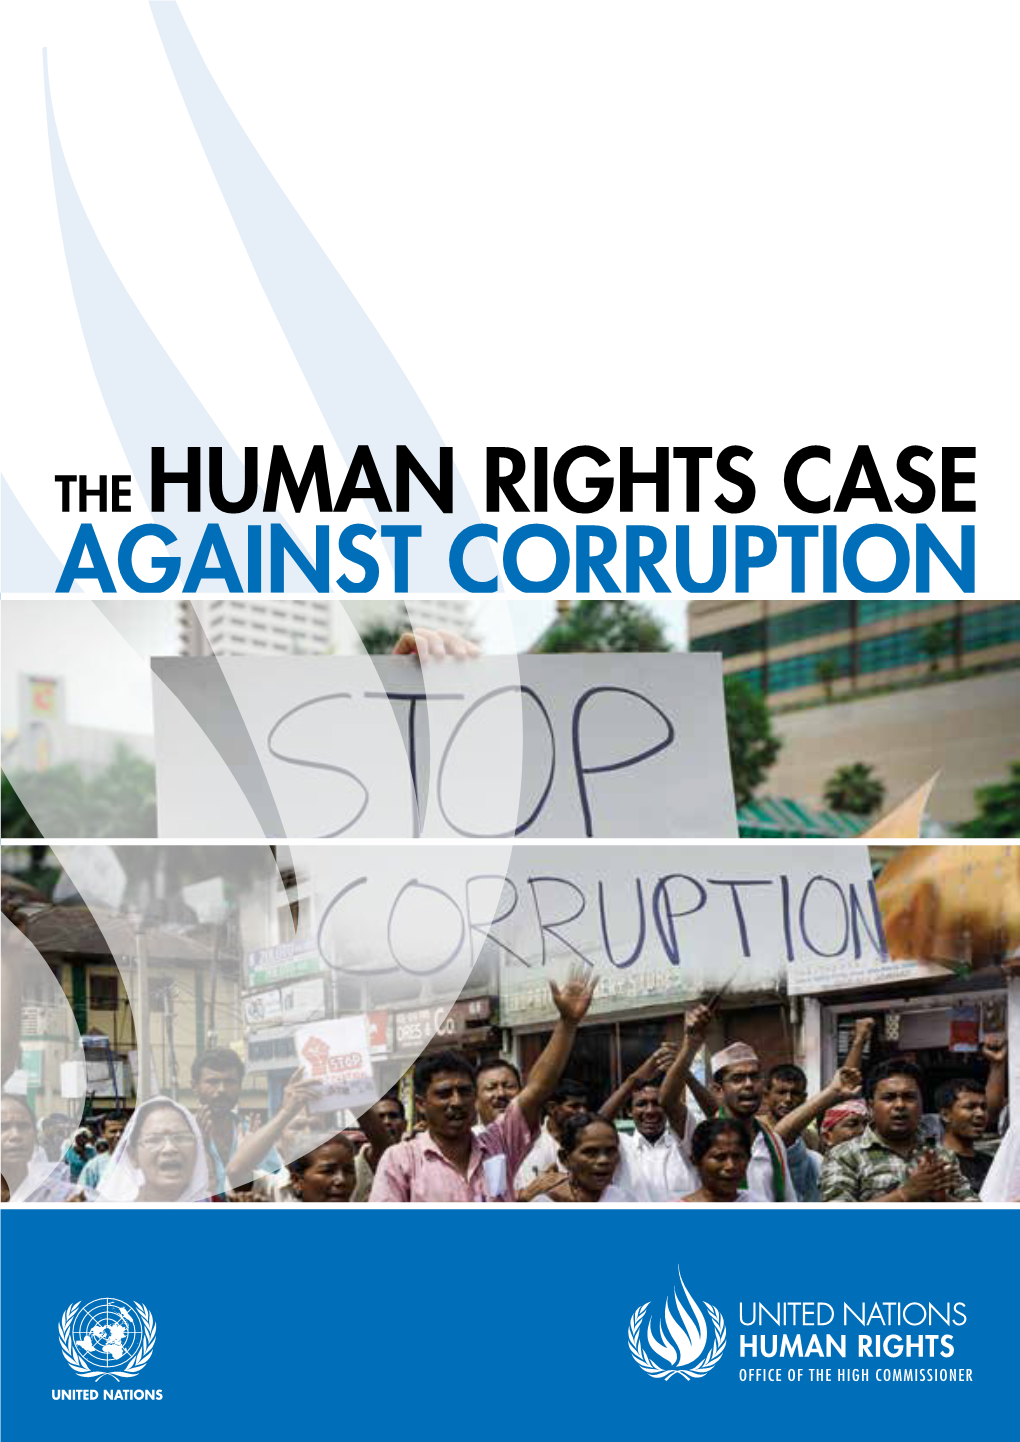 The Human Rights Case Against Corruption, Briefly Outlines the Case Against Corruption from a Human Rights Perspective